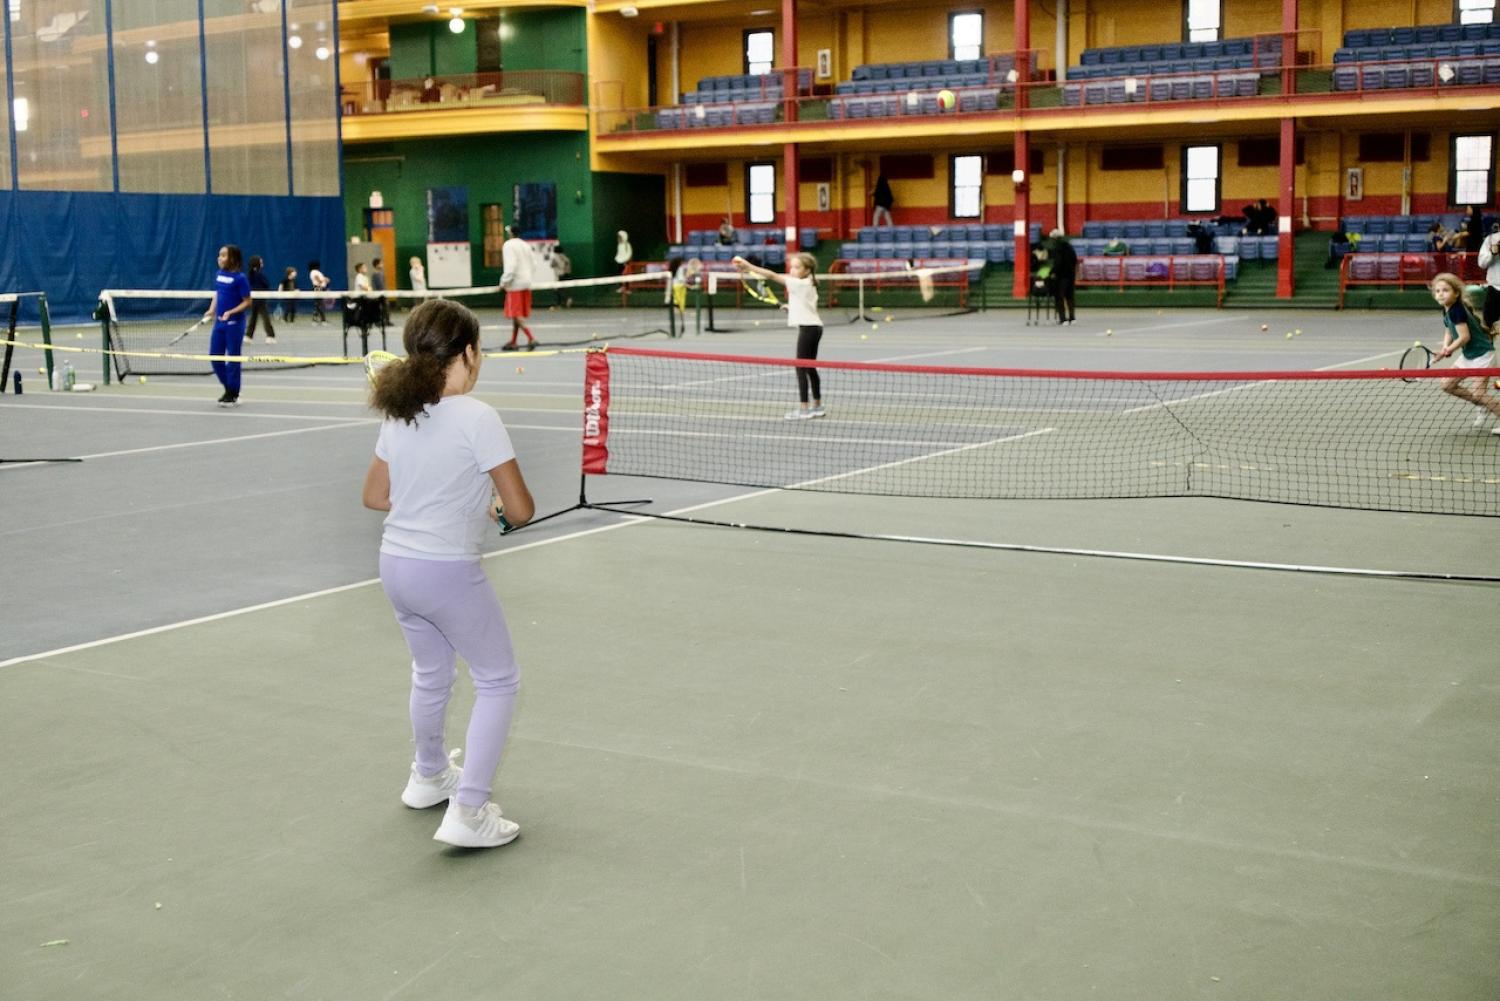 Youth playing tennis matches.